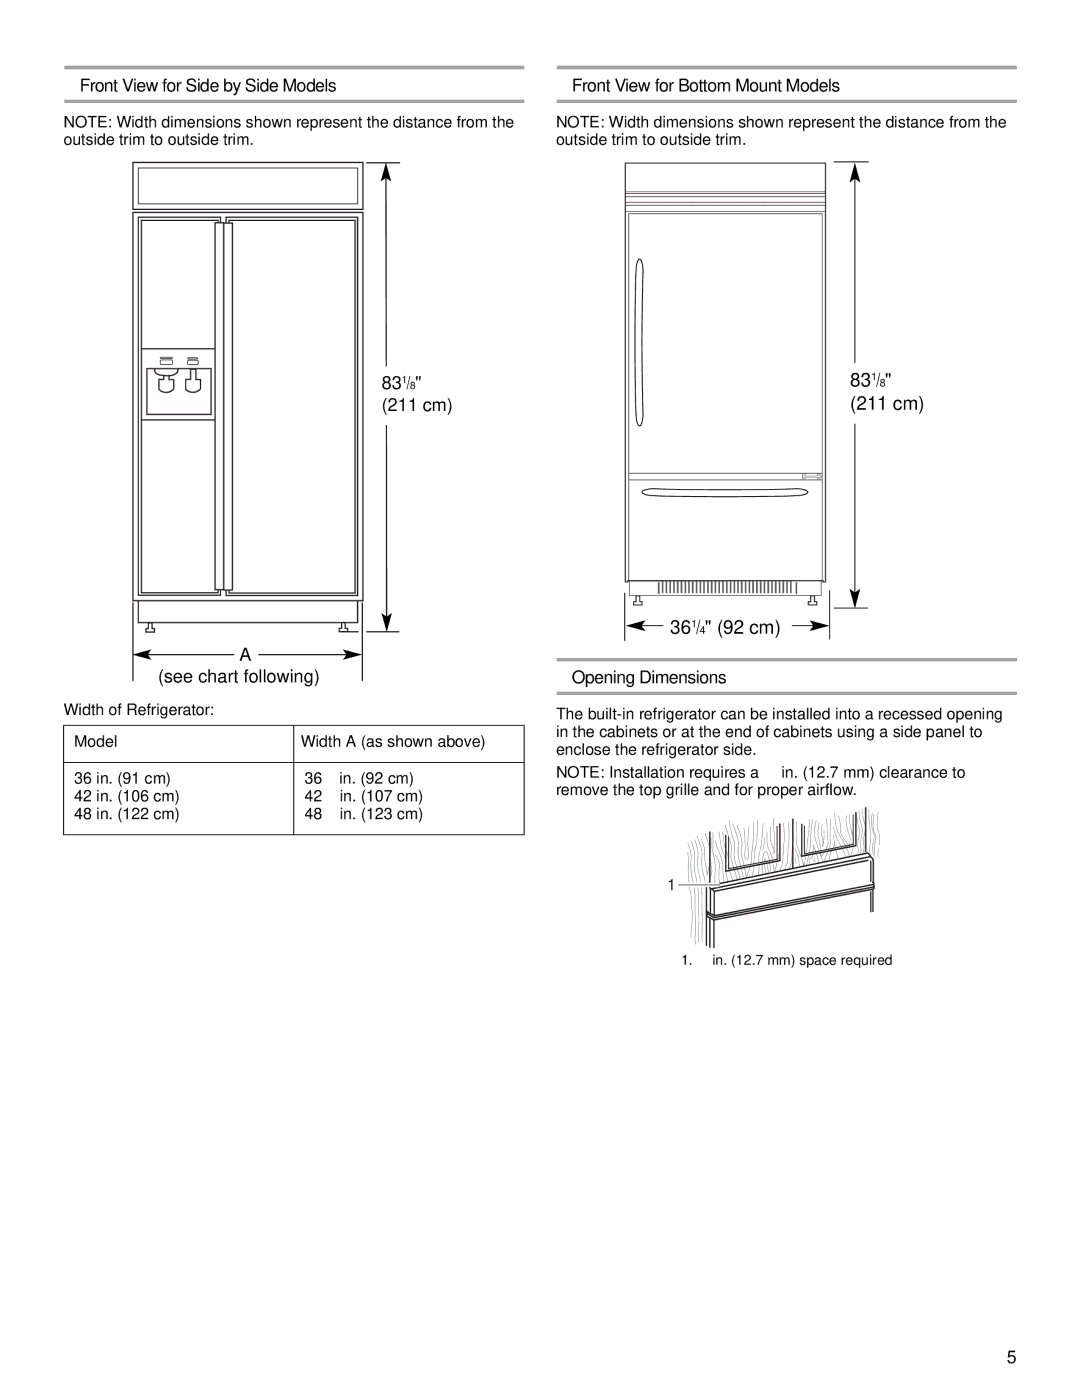 KitchenAid 2266877 manual Opening Dimensions, Width of Refrigerator Model Width a as shown above 